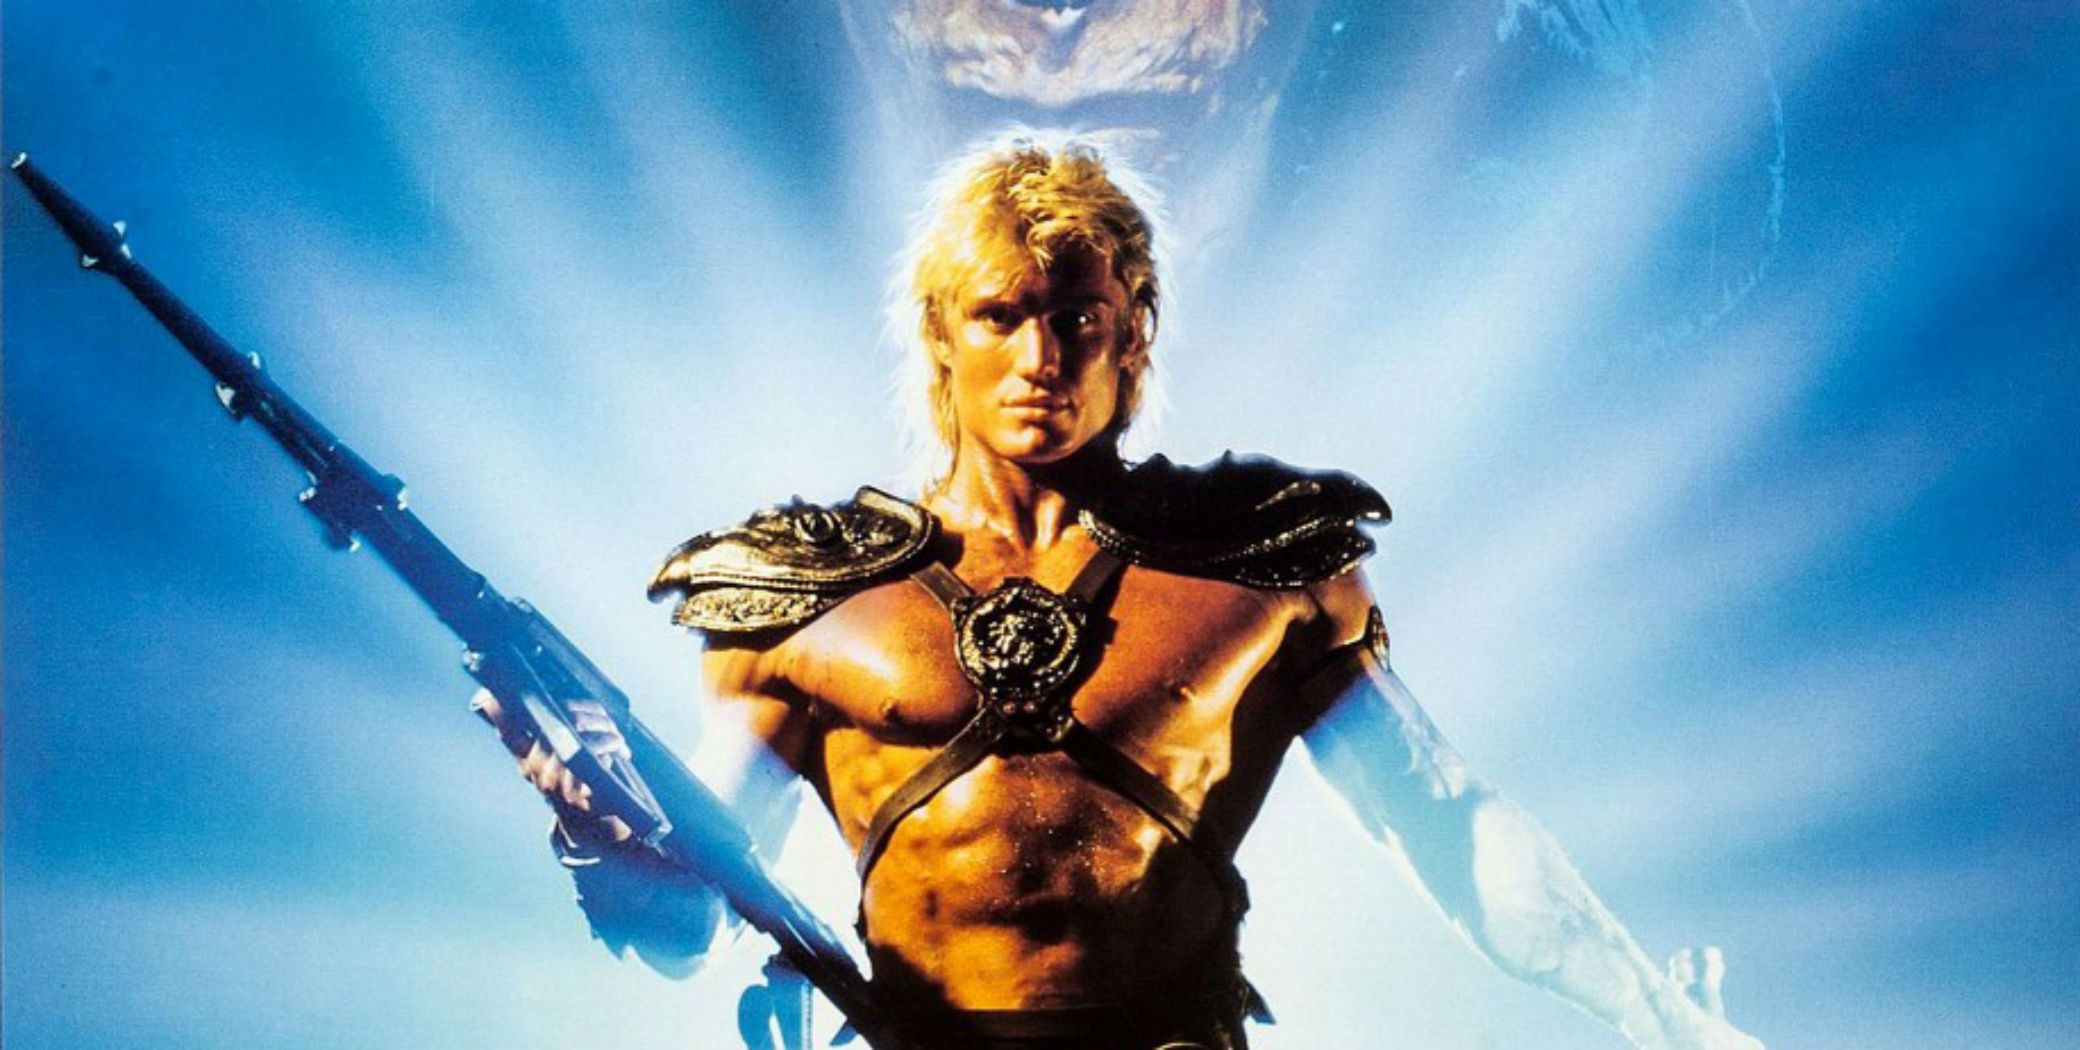 West Side Story star to play He-Man in new Masters of the Universe